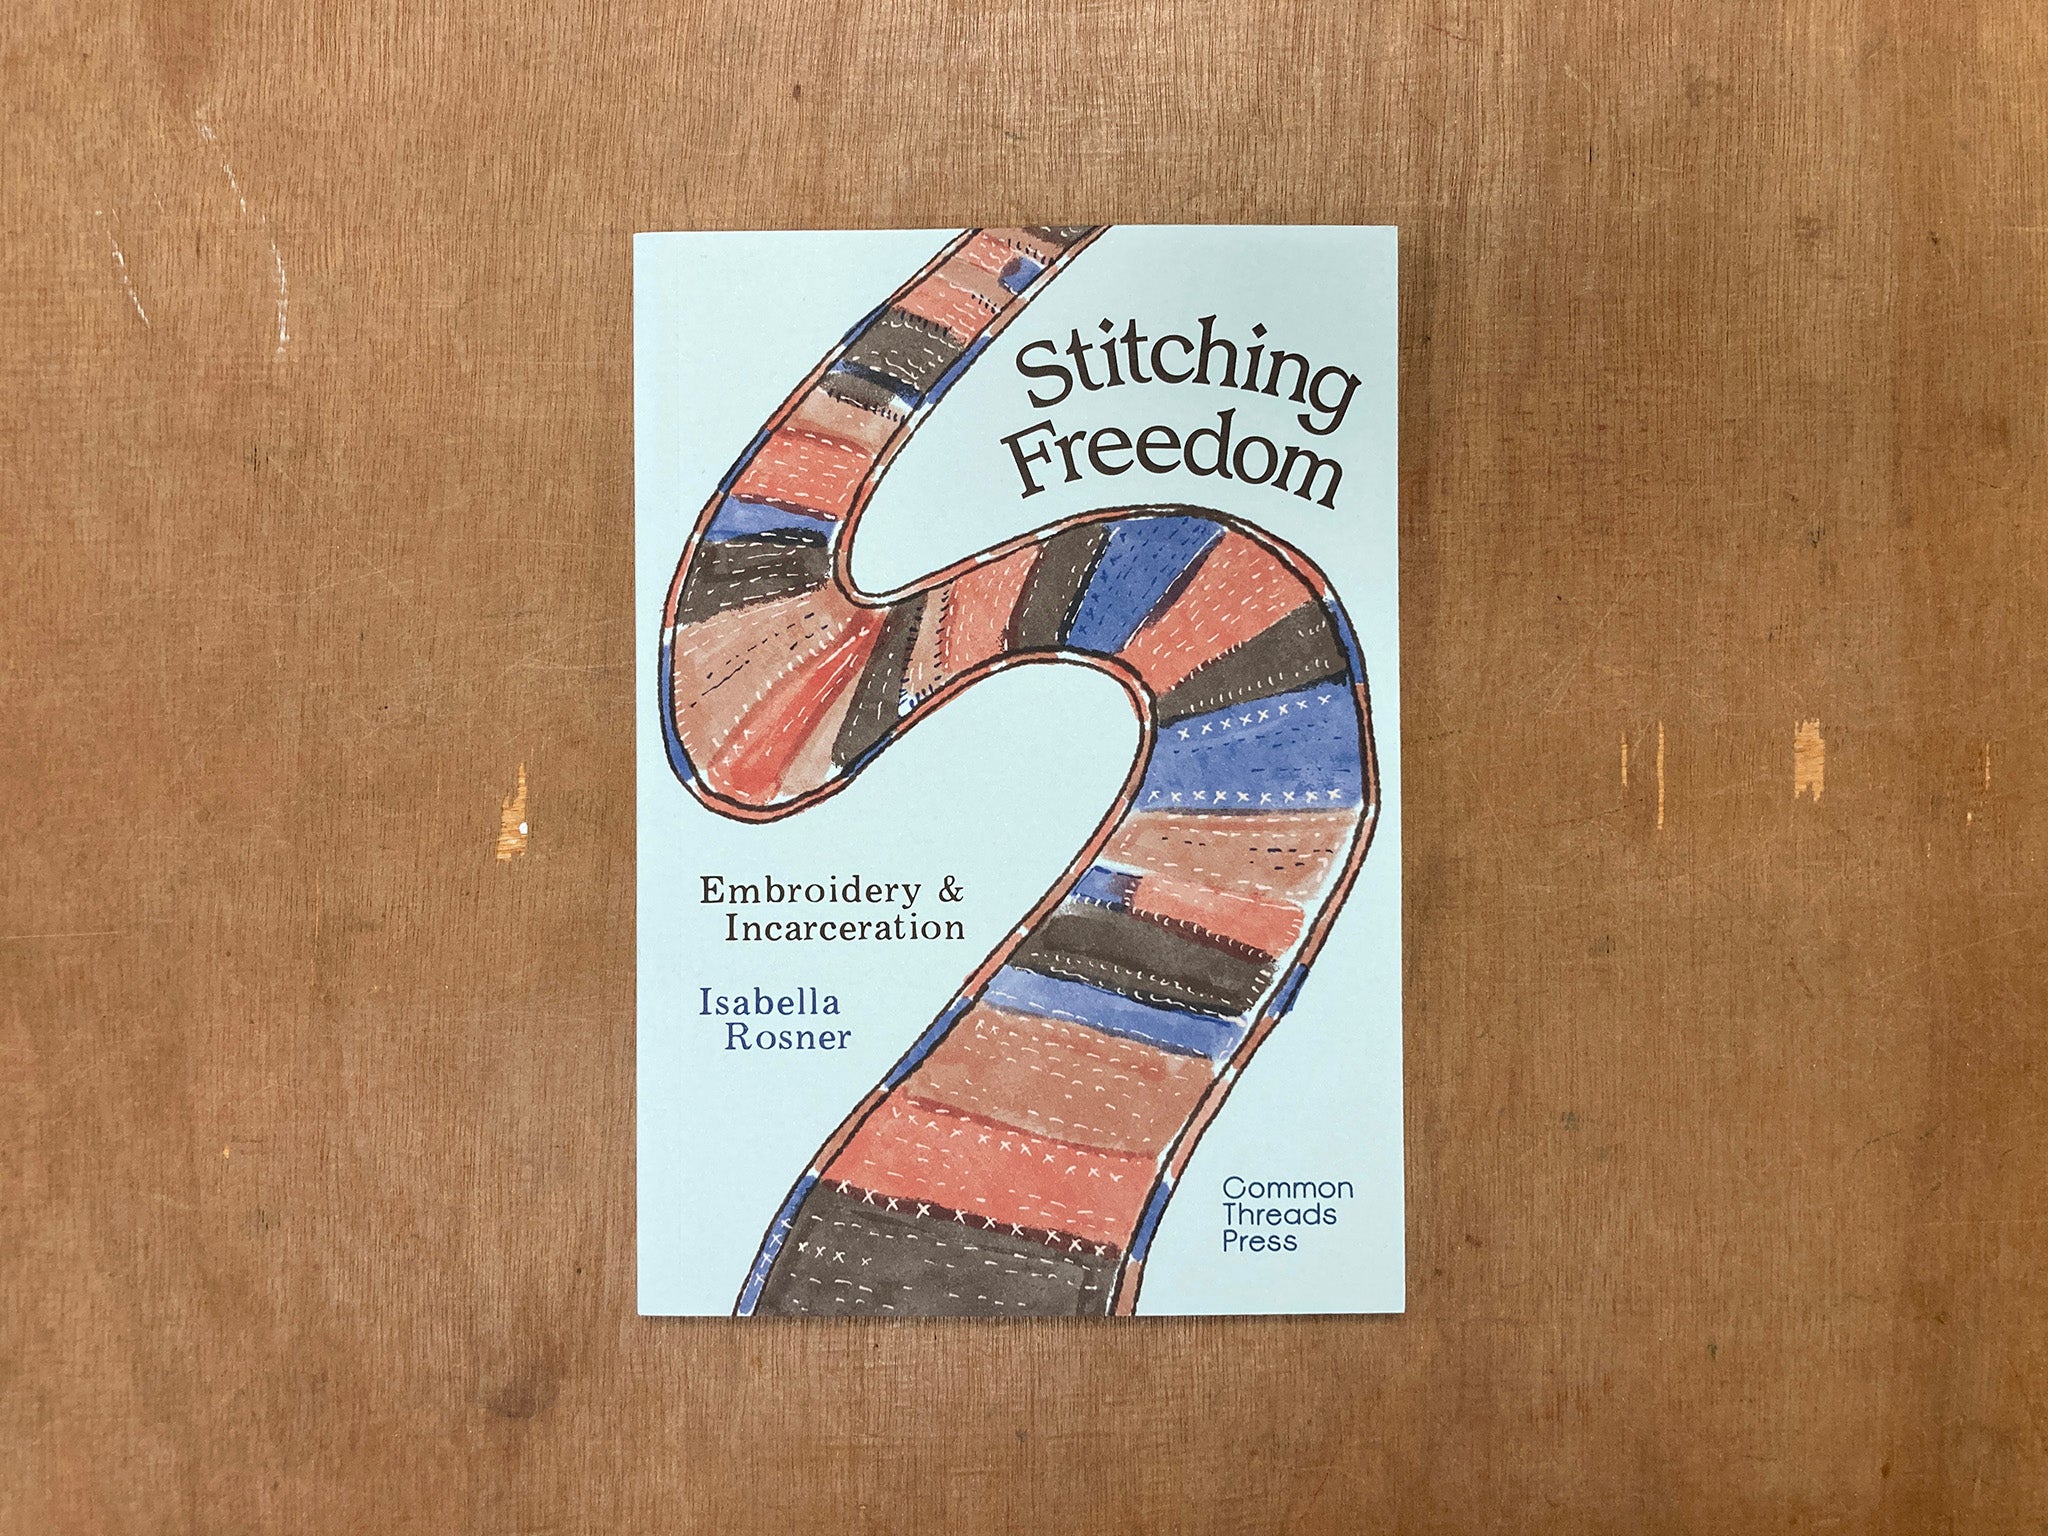 STITCHING FREEDOM: EMBROIDERY AND INCARCERATION by Isabella Rosner